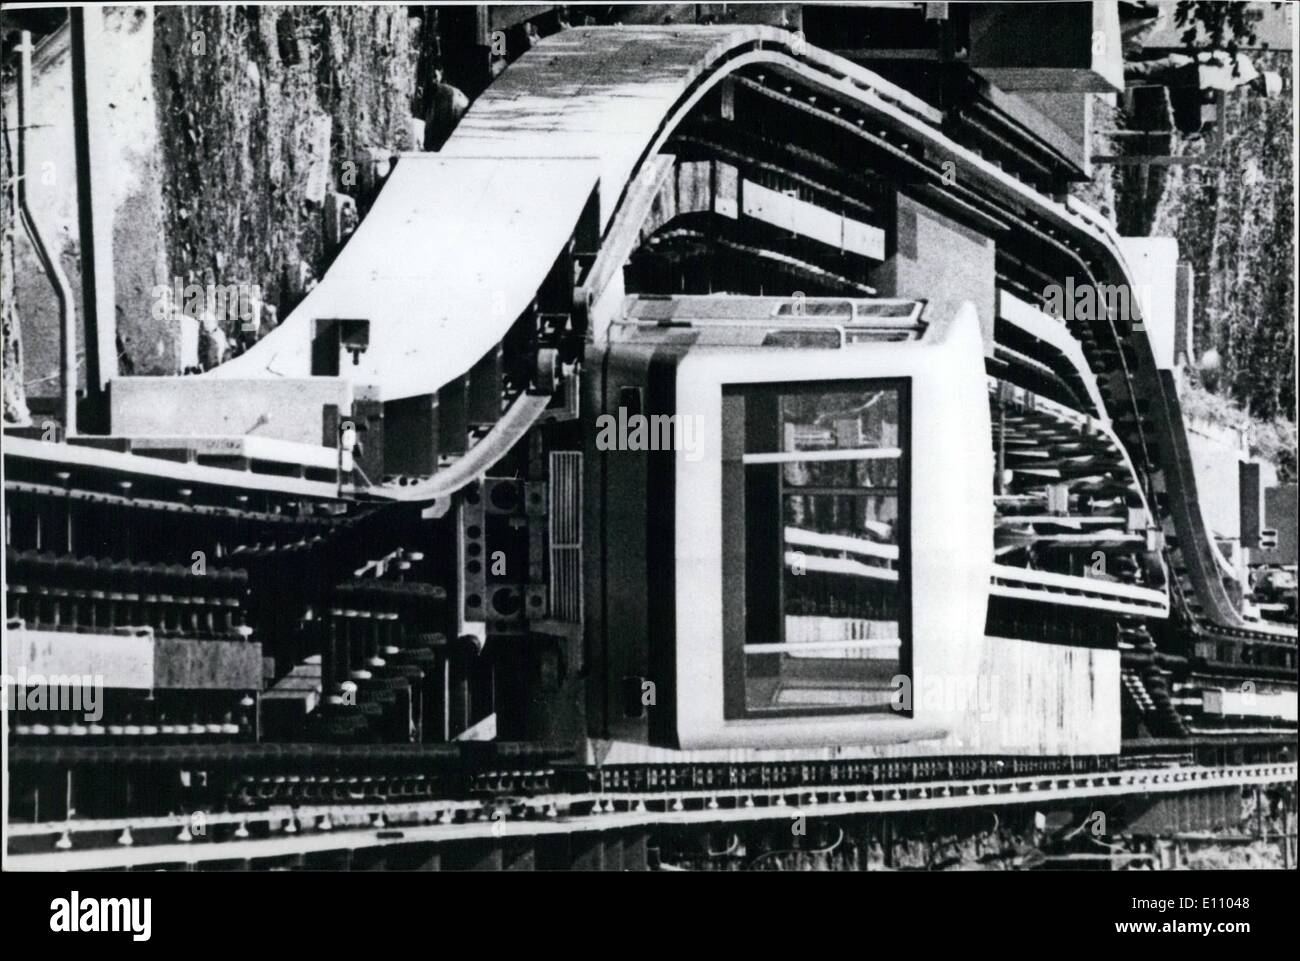 Sep. 09, 1974 - TESTS COMPLETED ON JAPANESE URBAN TRANSPORTATION SYSTEM. The ''Beltica'' Urban Transportation System, which could solve many traffic problems, has completed its tests at Fuchu, near Tokyo. The system developed by Toshiba, consists of ''motormanless'' 20-passenger capsules which circuit a city, slow down at stations automatically to let passengers on and off by different doors, moves rapidly between stations, makes little noise, and has low vibration levels. The capsules reach a speed of 24km/h, and slows down to 2,4 km/h at stations Stock Photo